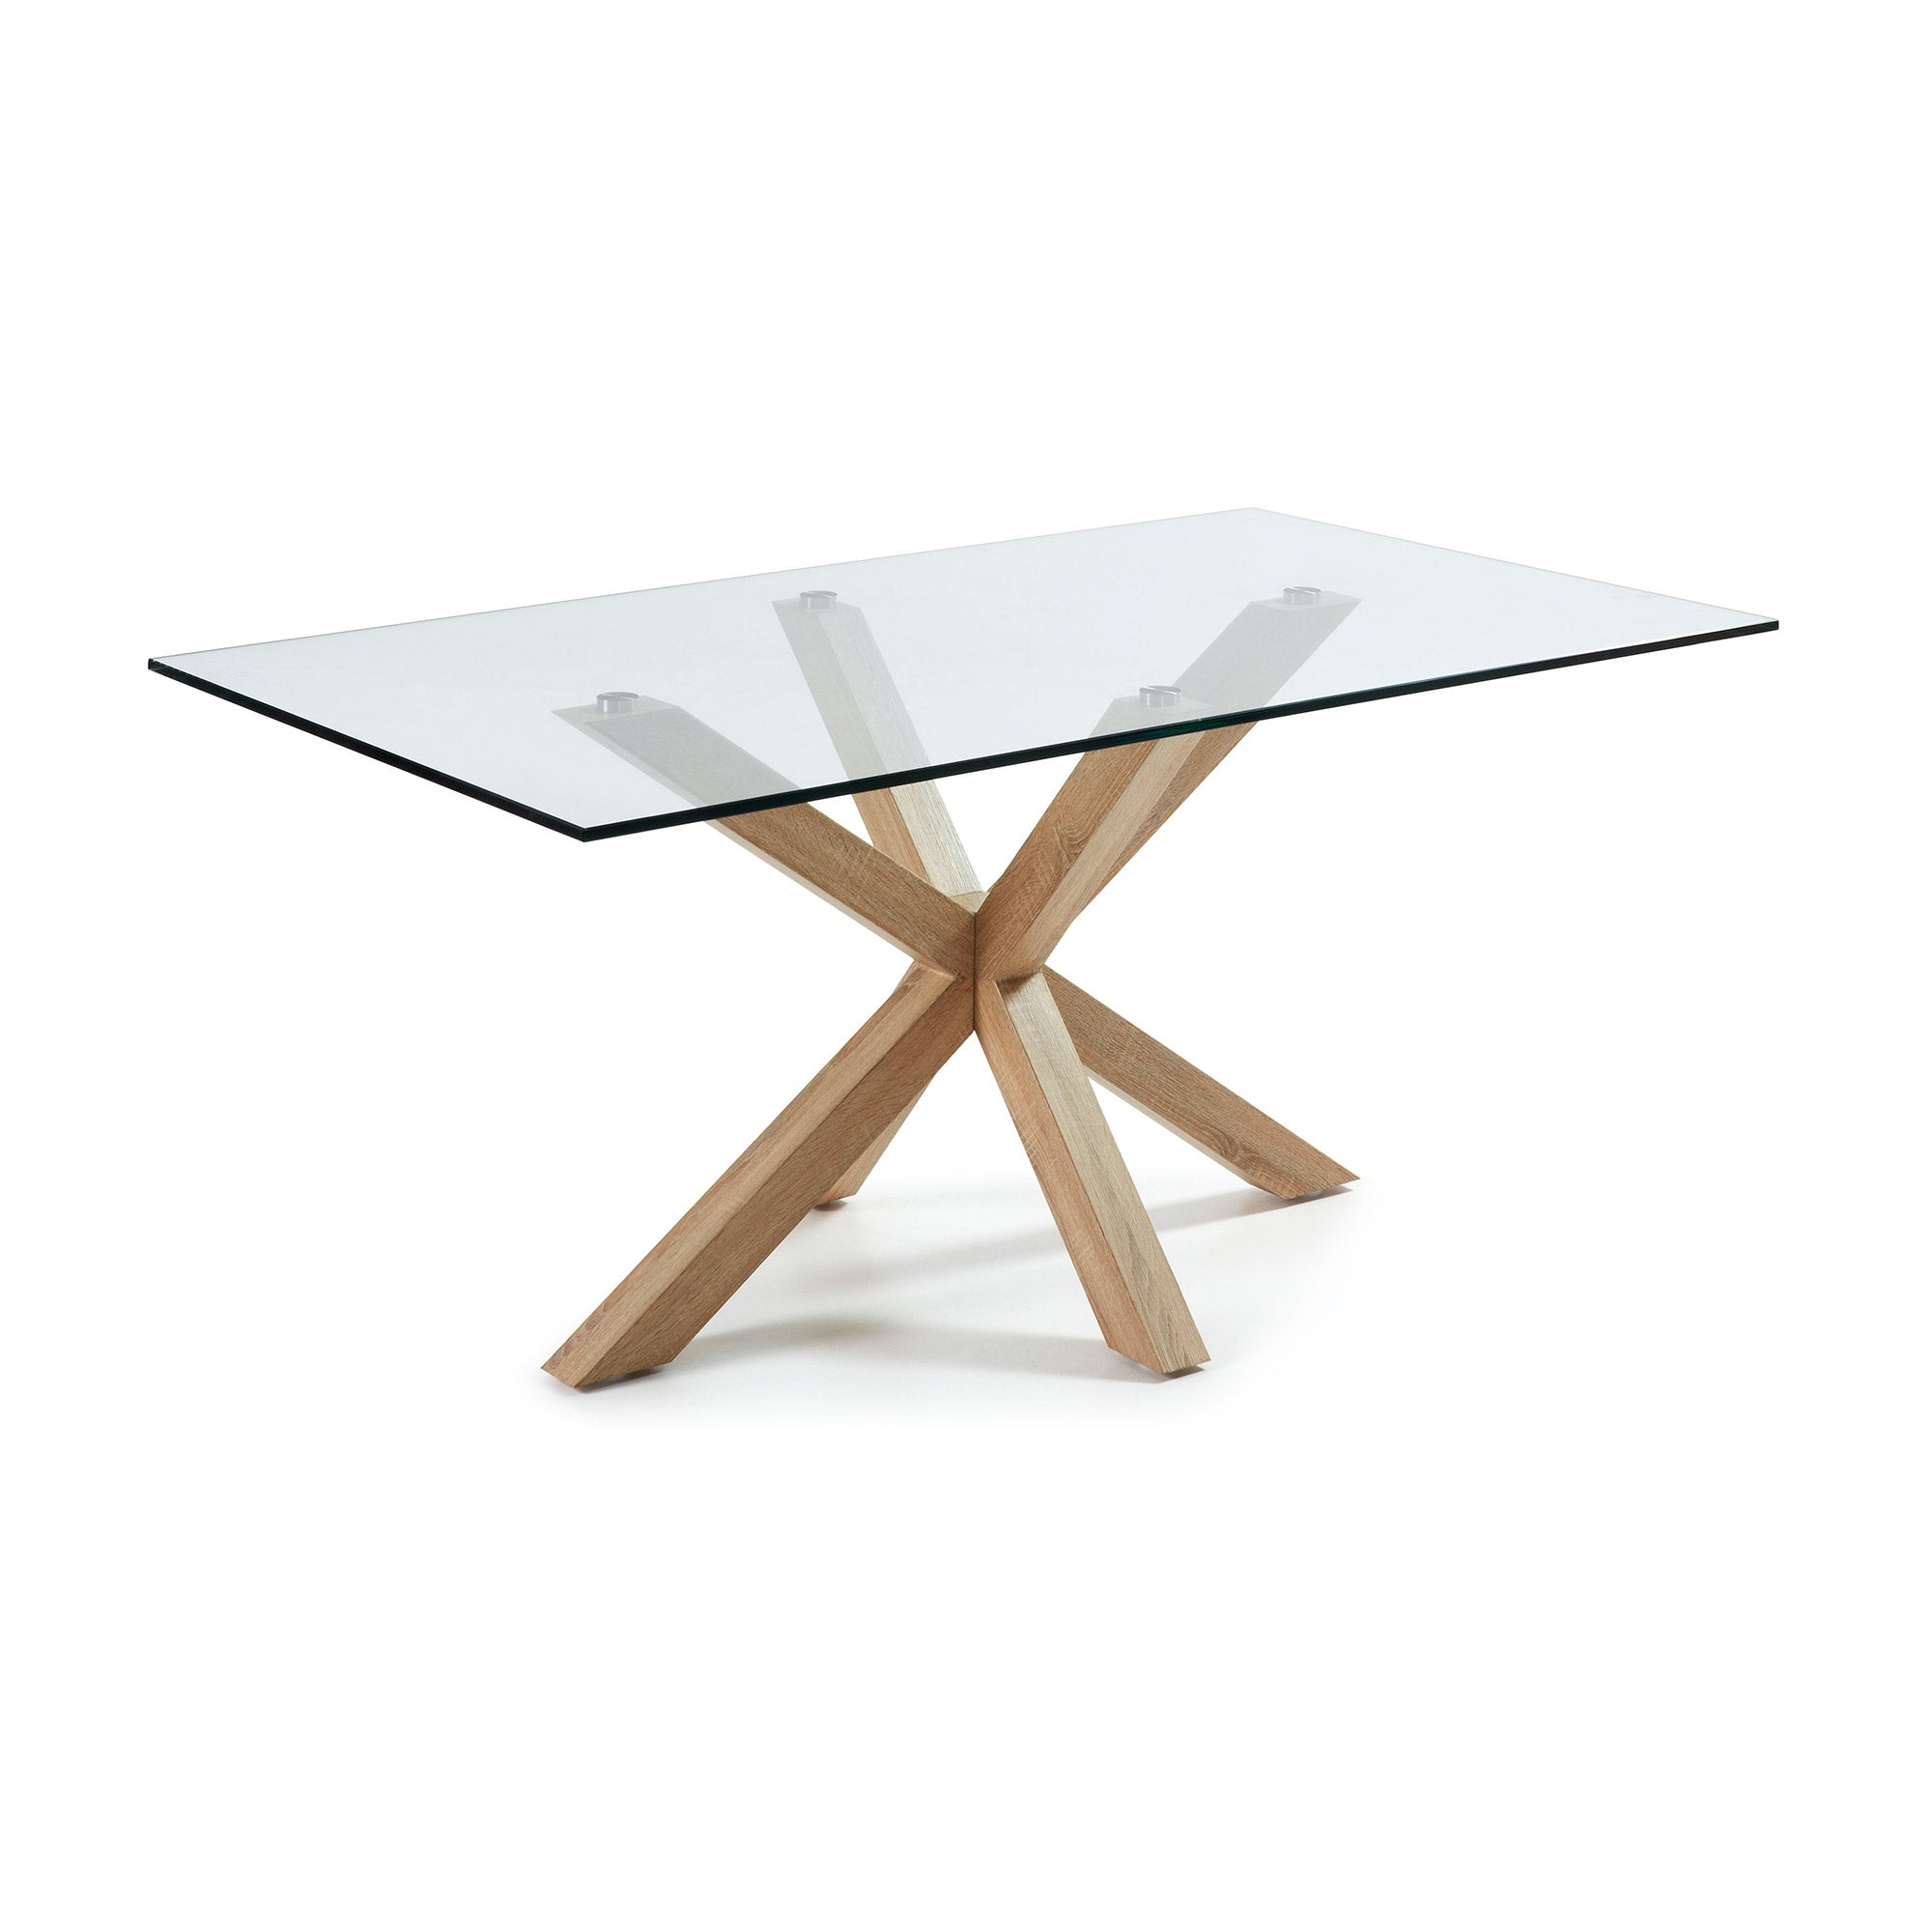 Argo glass table with steel legs with wood-effect finish 160 x 90 cm